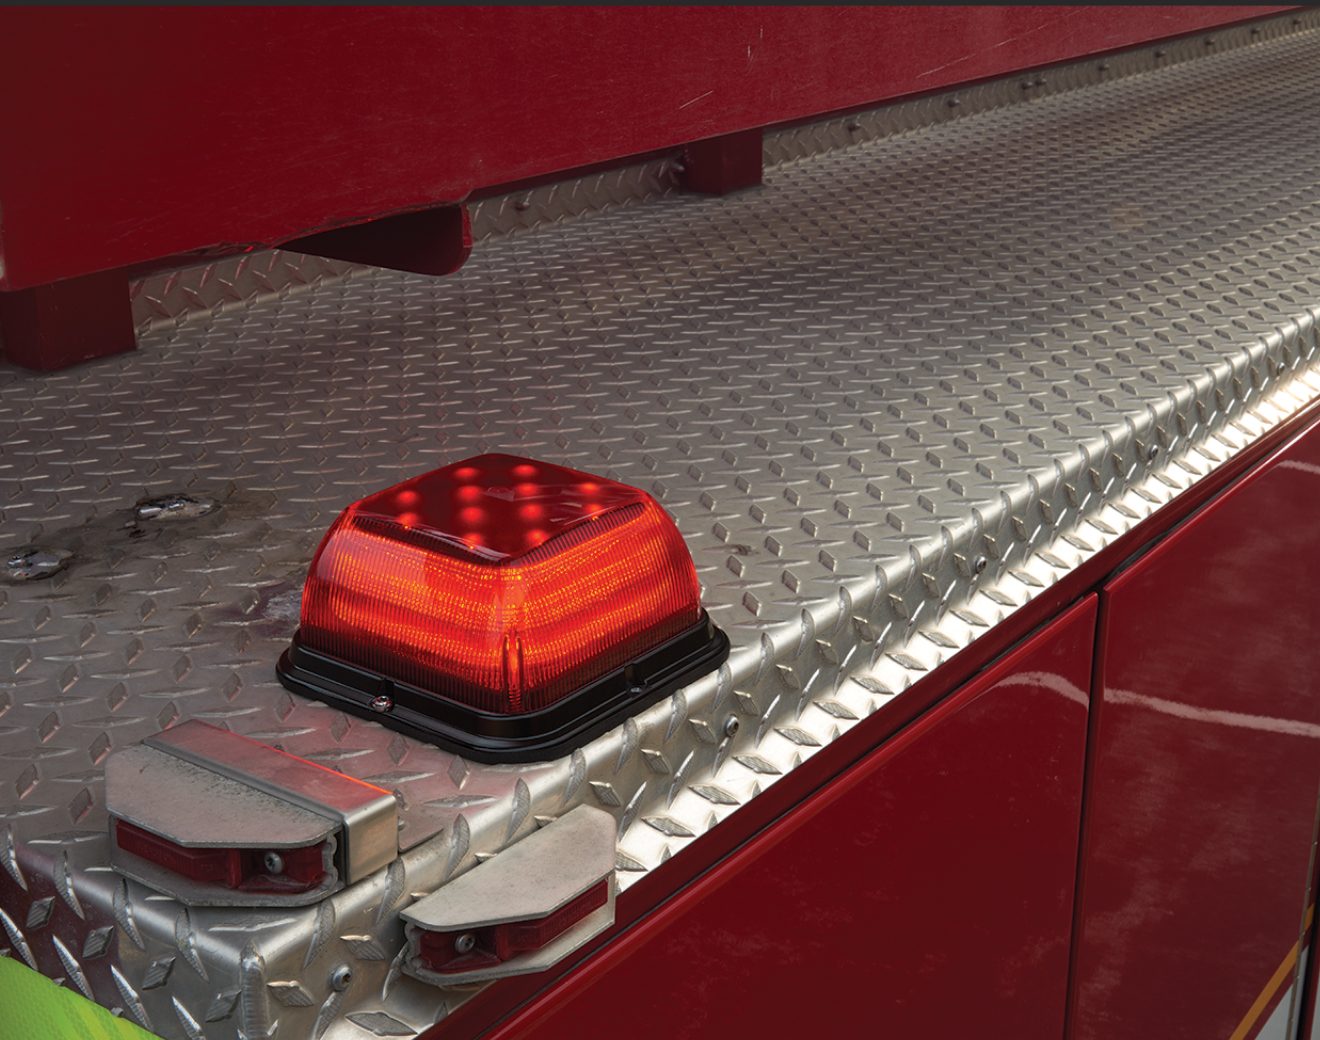 Upfitting for fire engines